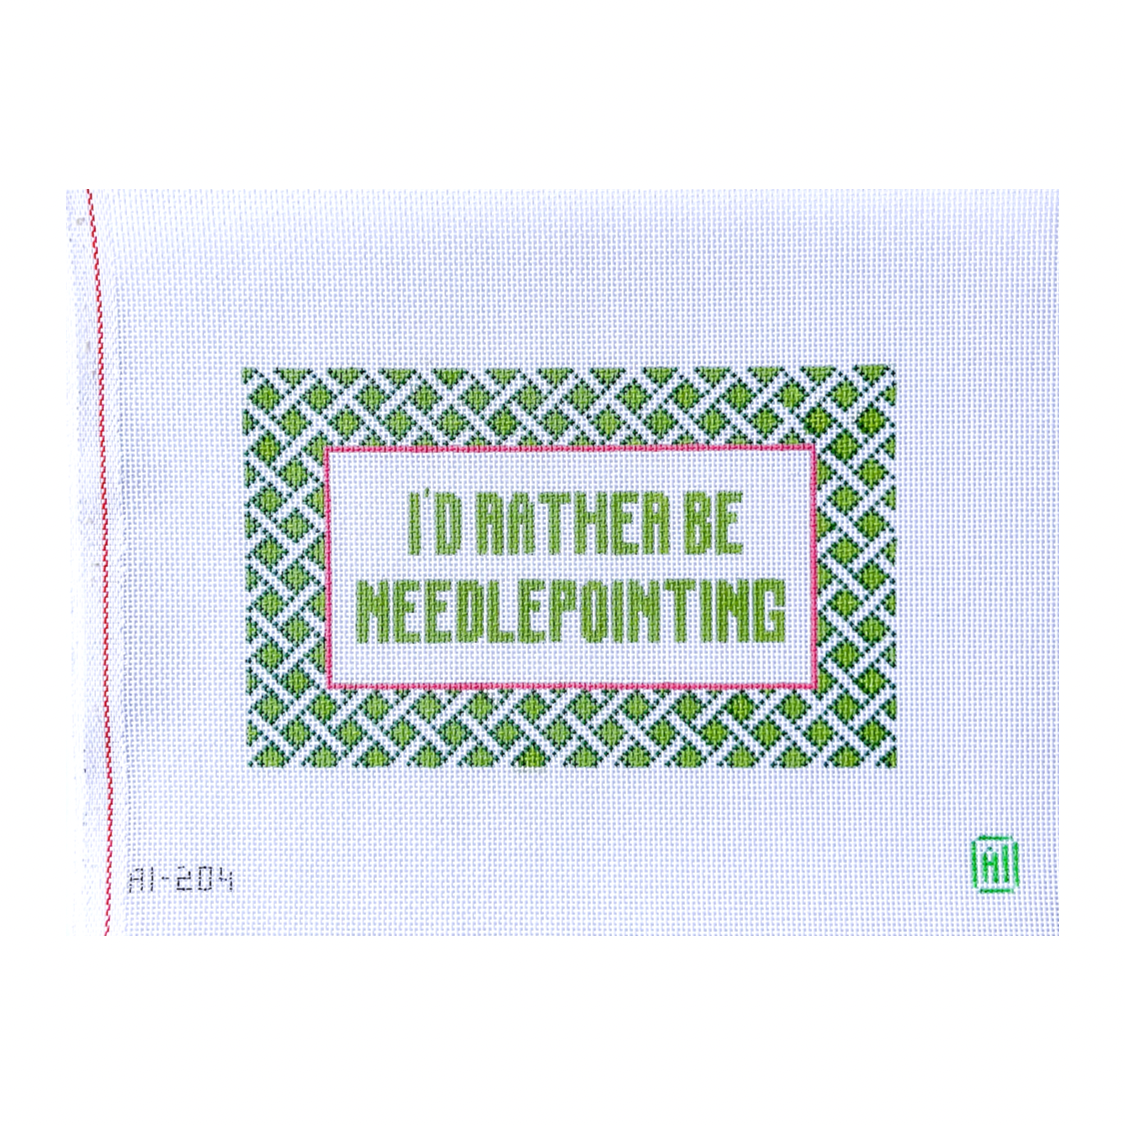 I’d Rather Be Needlepointing